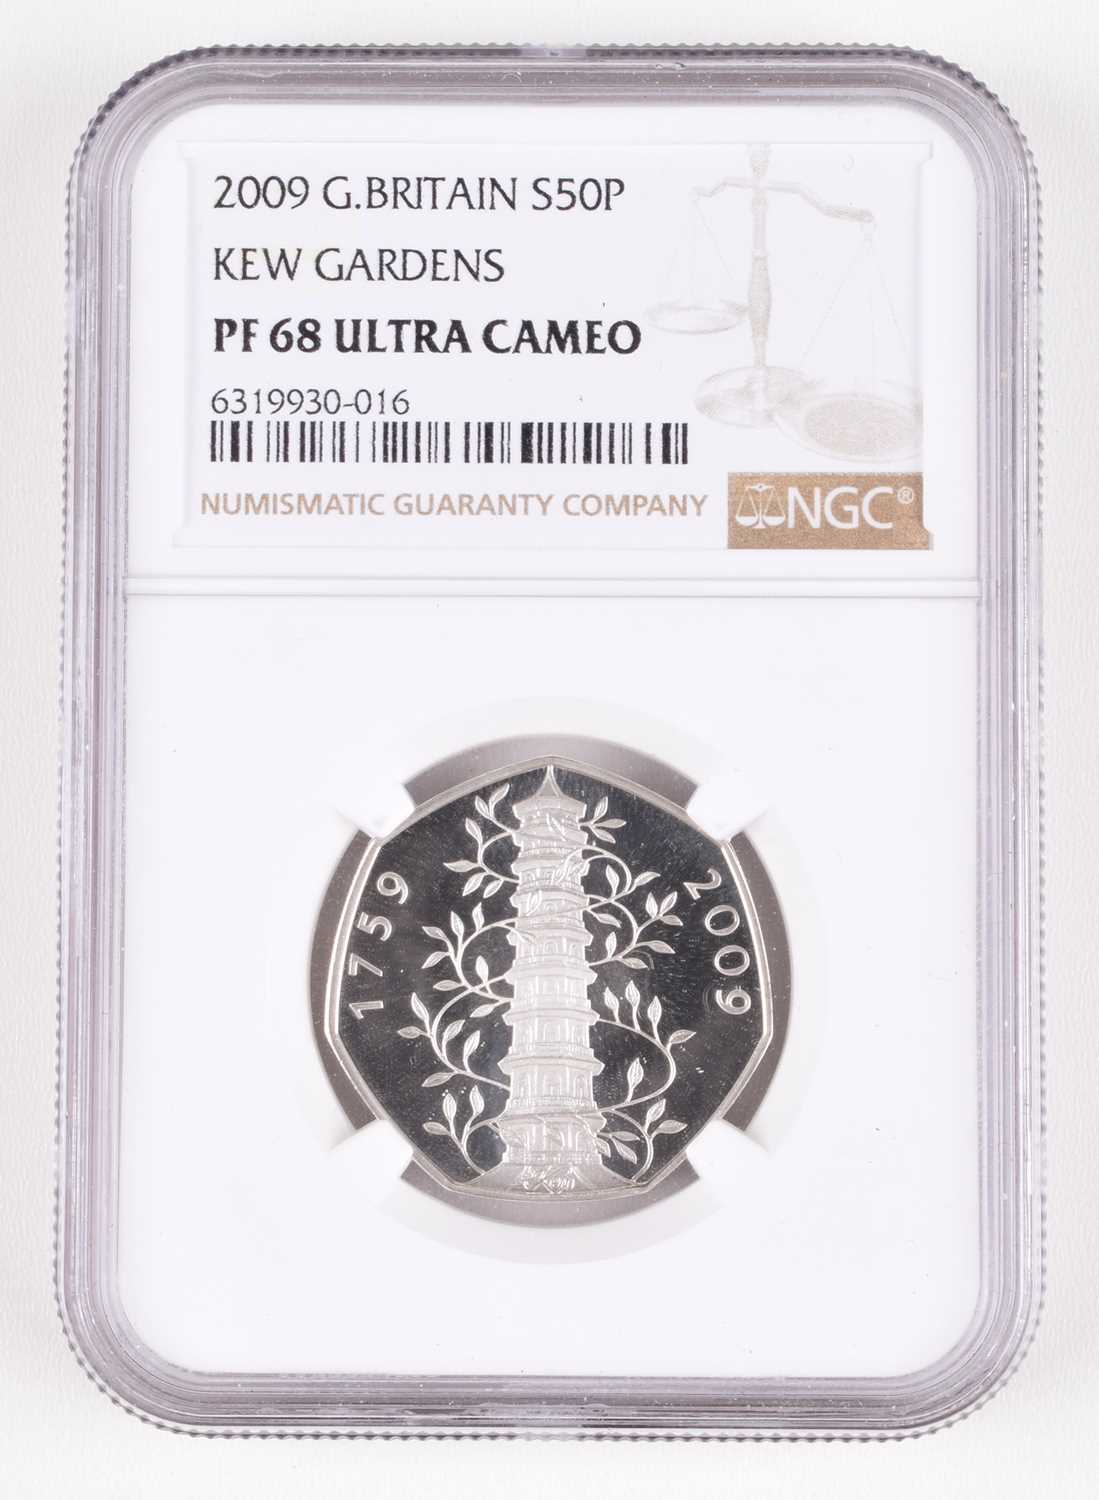 Lot 68 - 2009 Royal Mint, Silver Proof Ultra Cameo Kew Gardens Fifty Pence, slabbed.